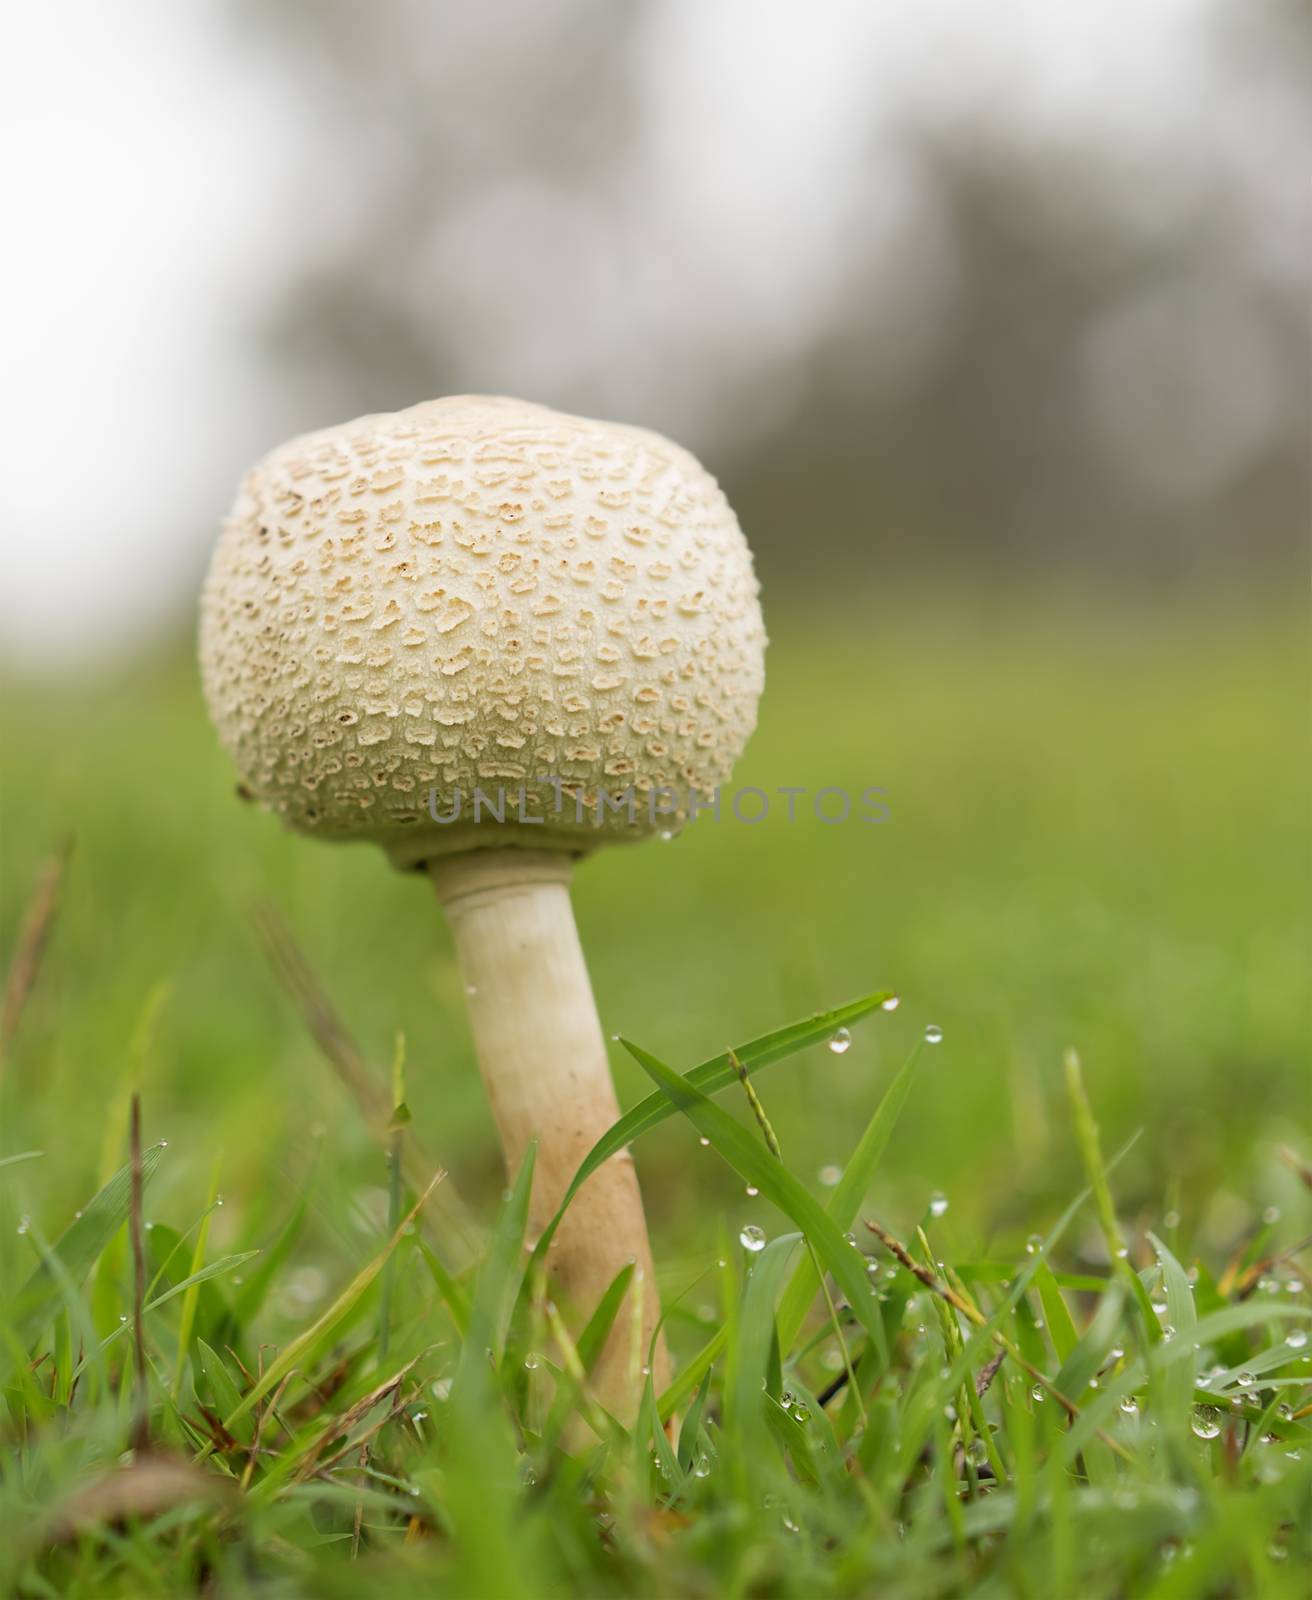 Australia, overcast rainy Queensland weather with raindrops and new mushroom growing through wet green grass